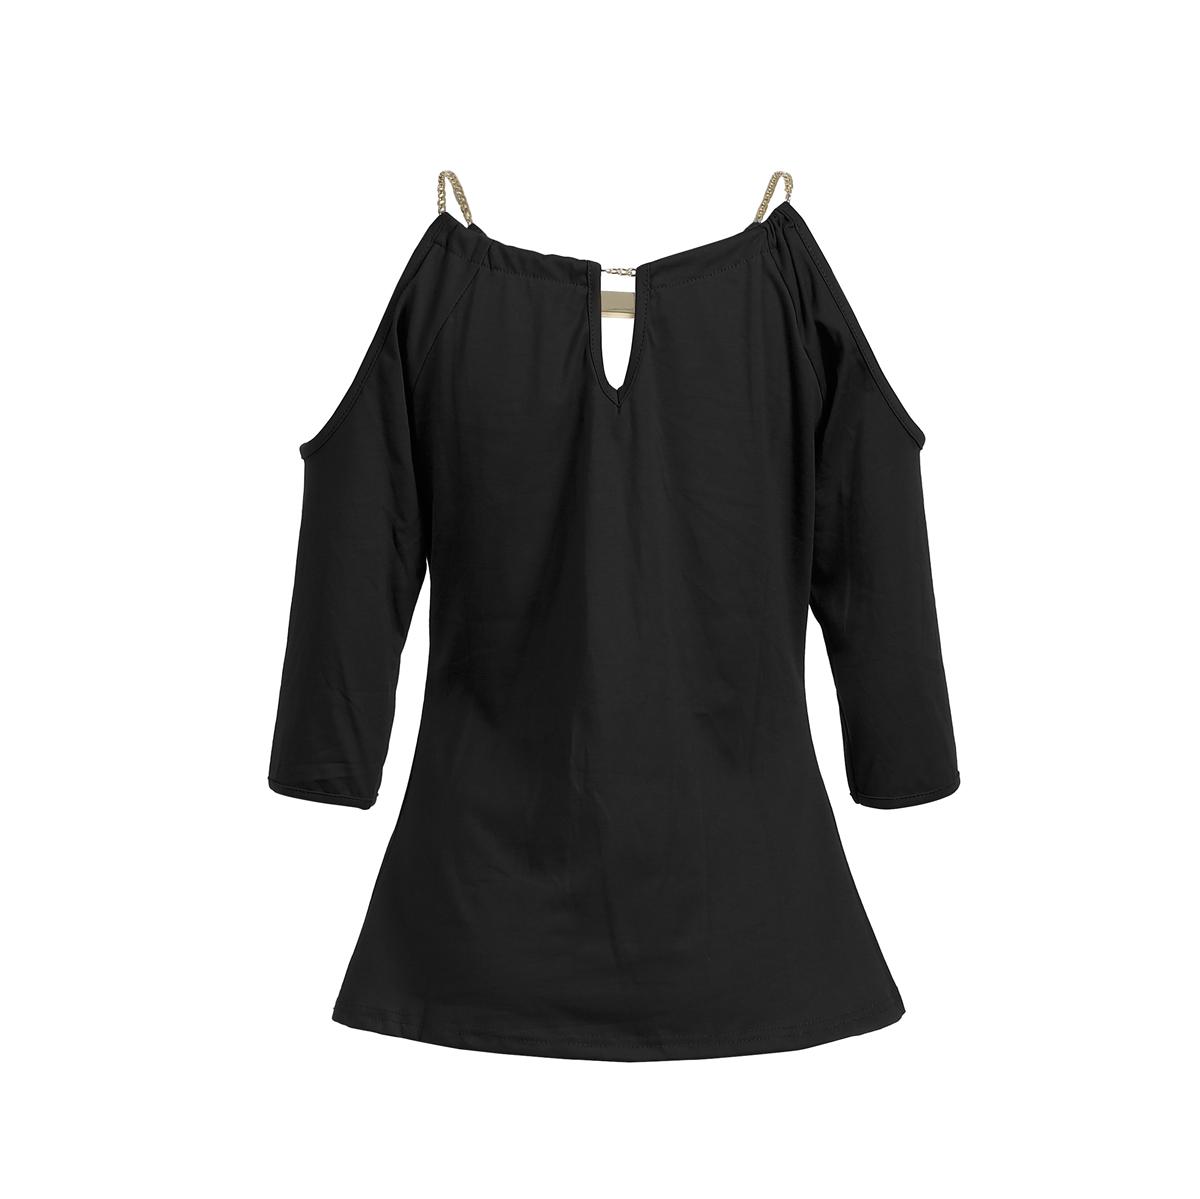 Изображение товара: New Fashion Women Sexy T-shirt Chic halter V Neck Summer Off Shoulder Tops Solid Black Ladies Loose Autumn Casual Tops